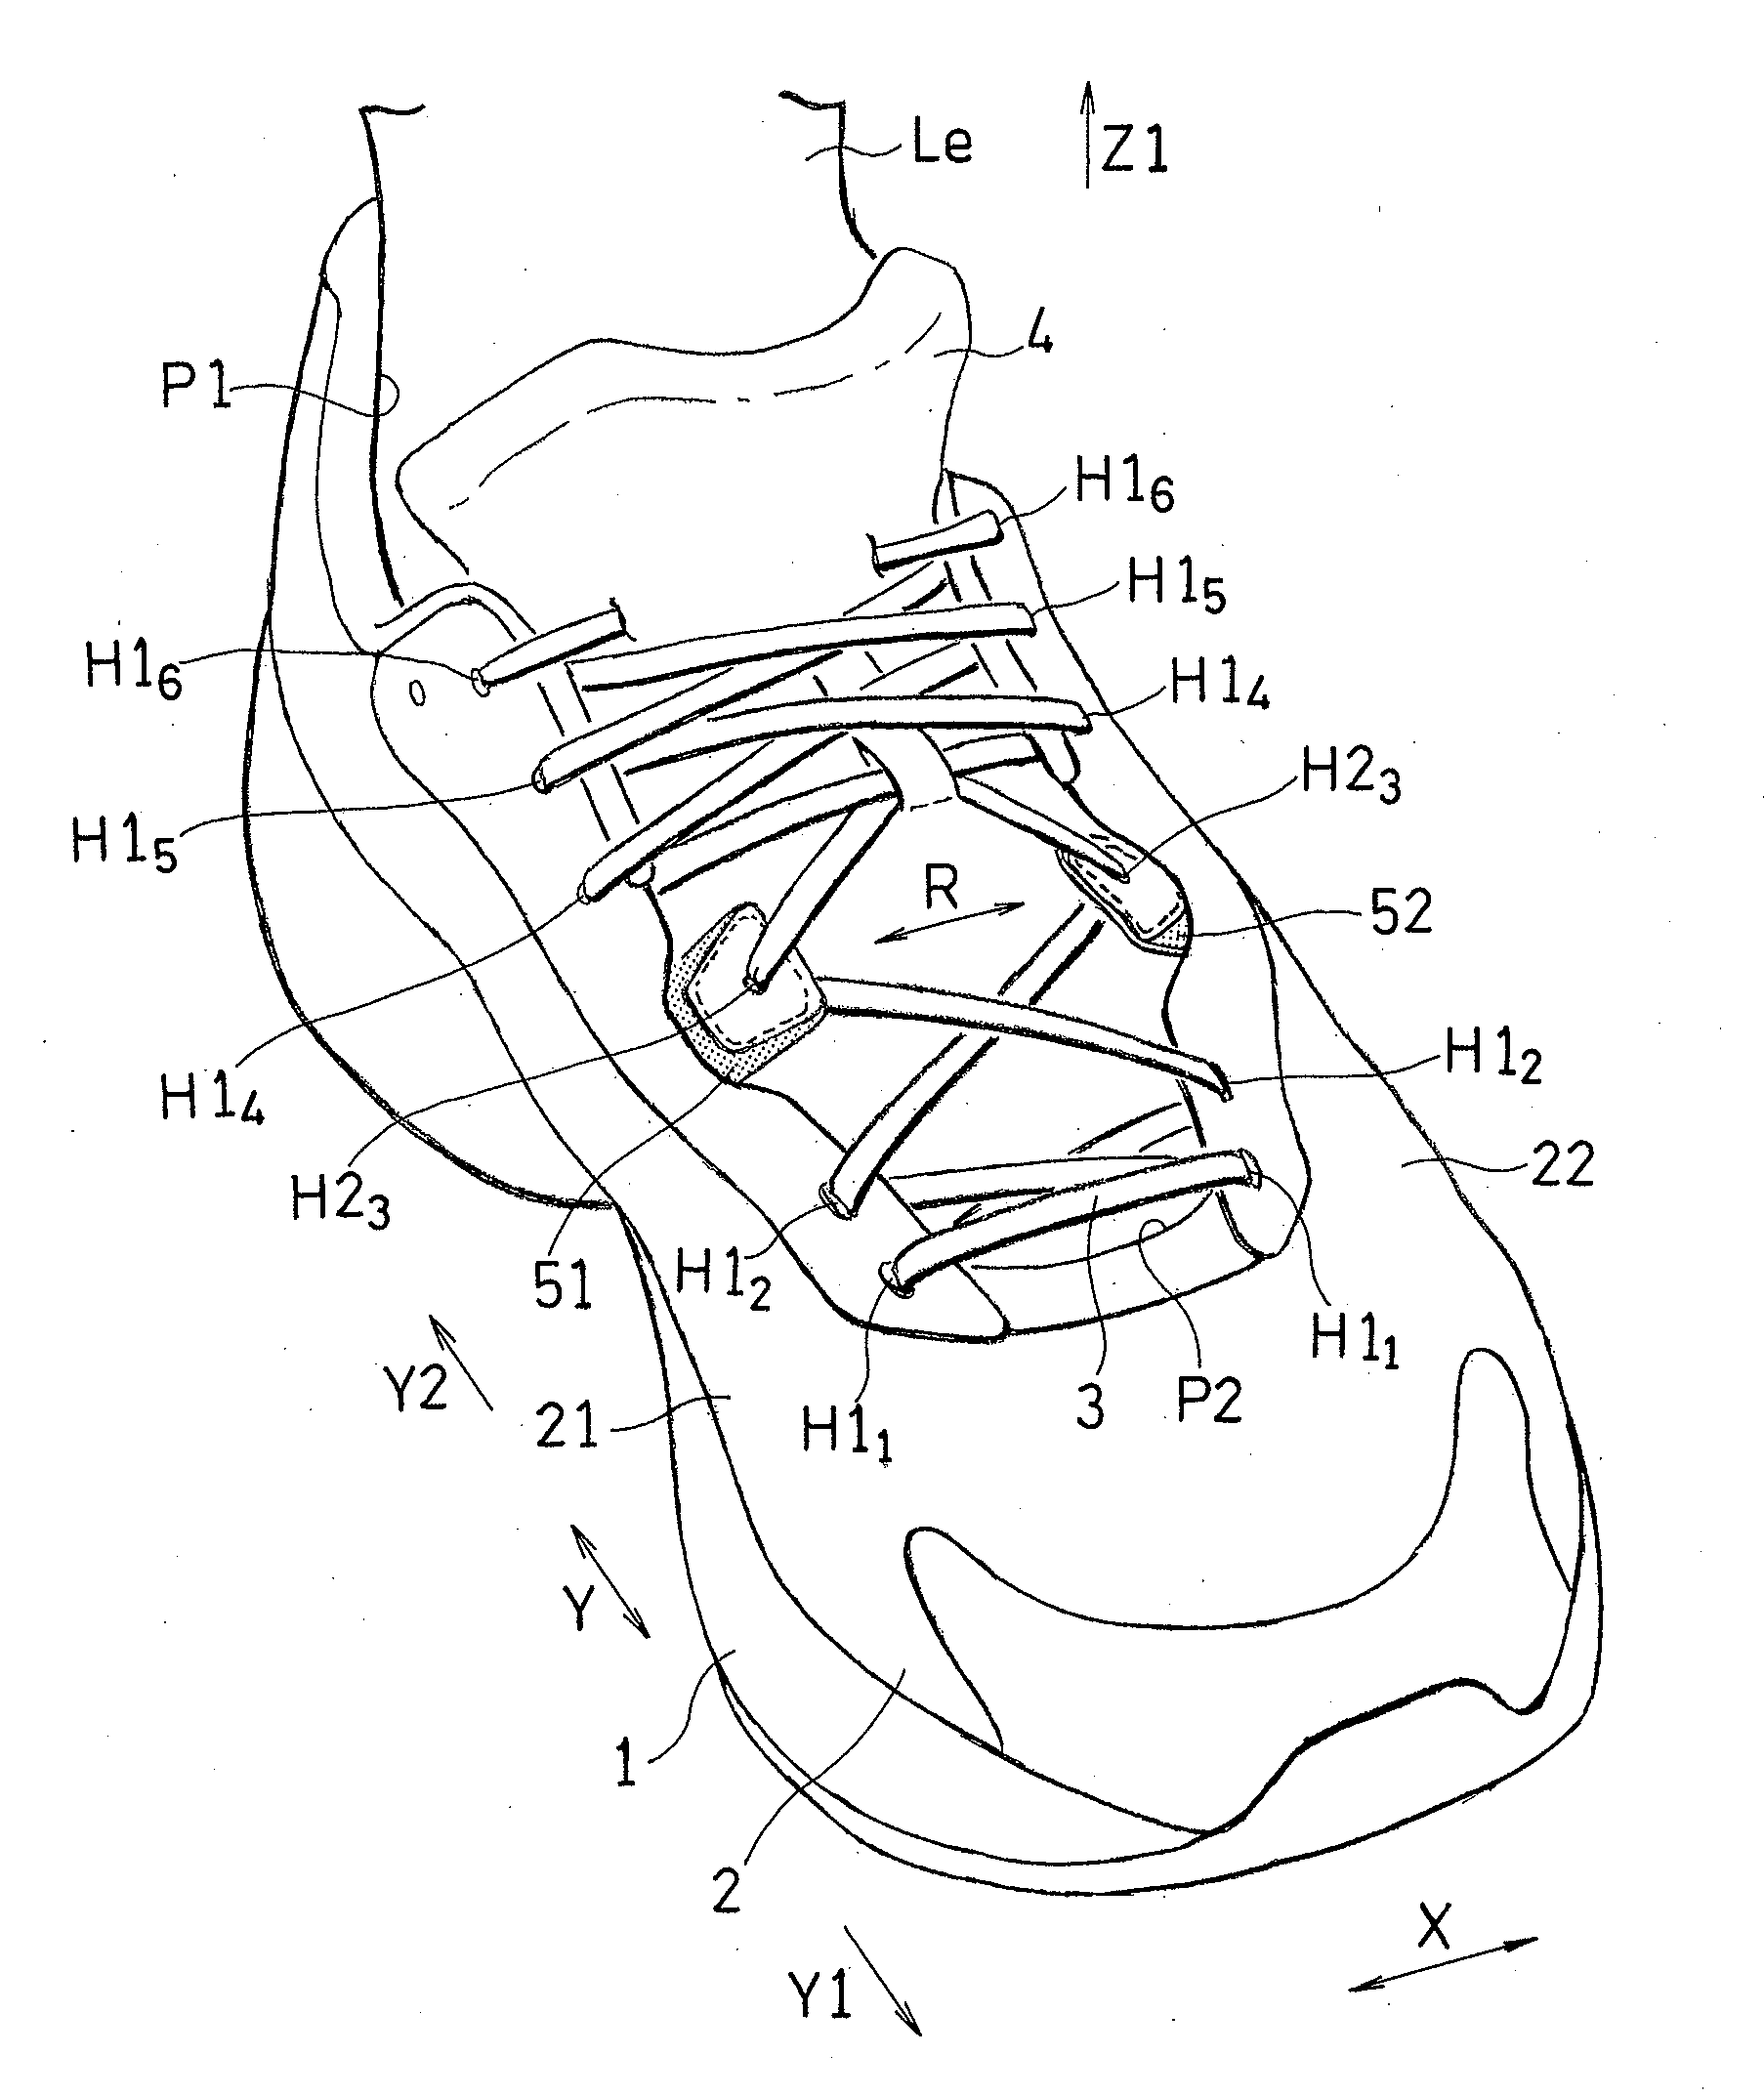 Shoe having lace fitting structure